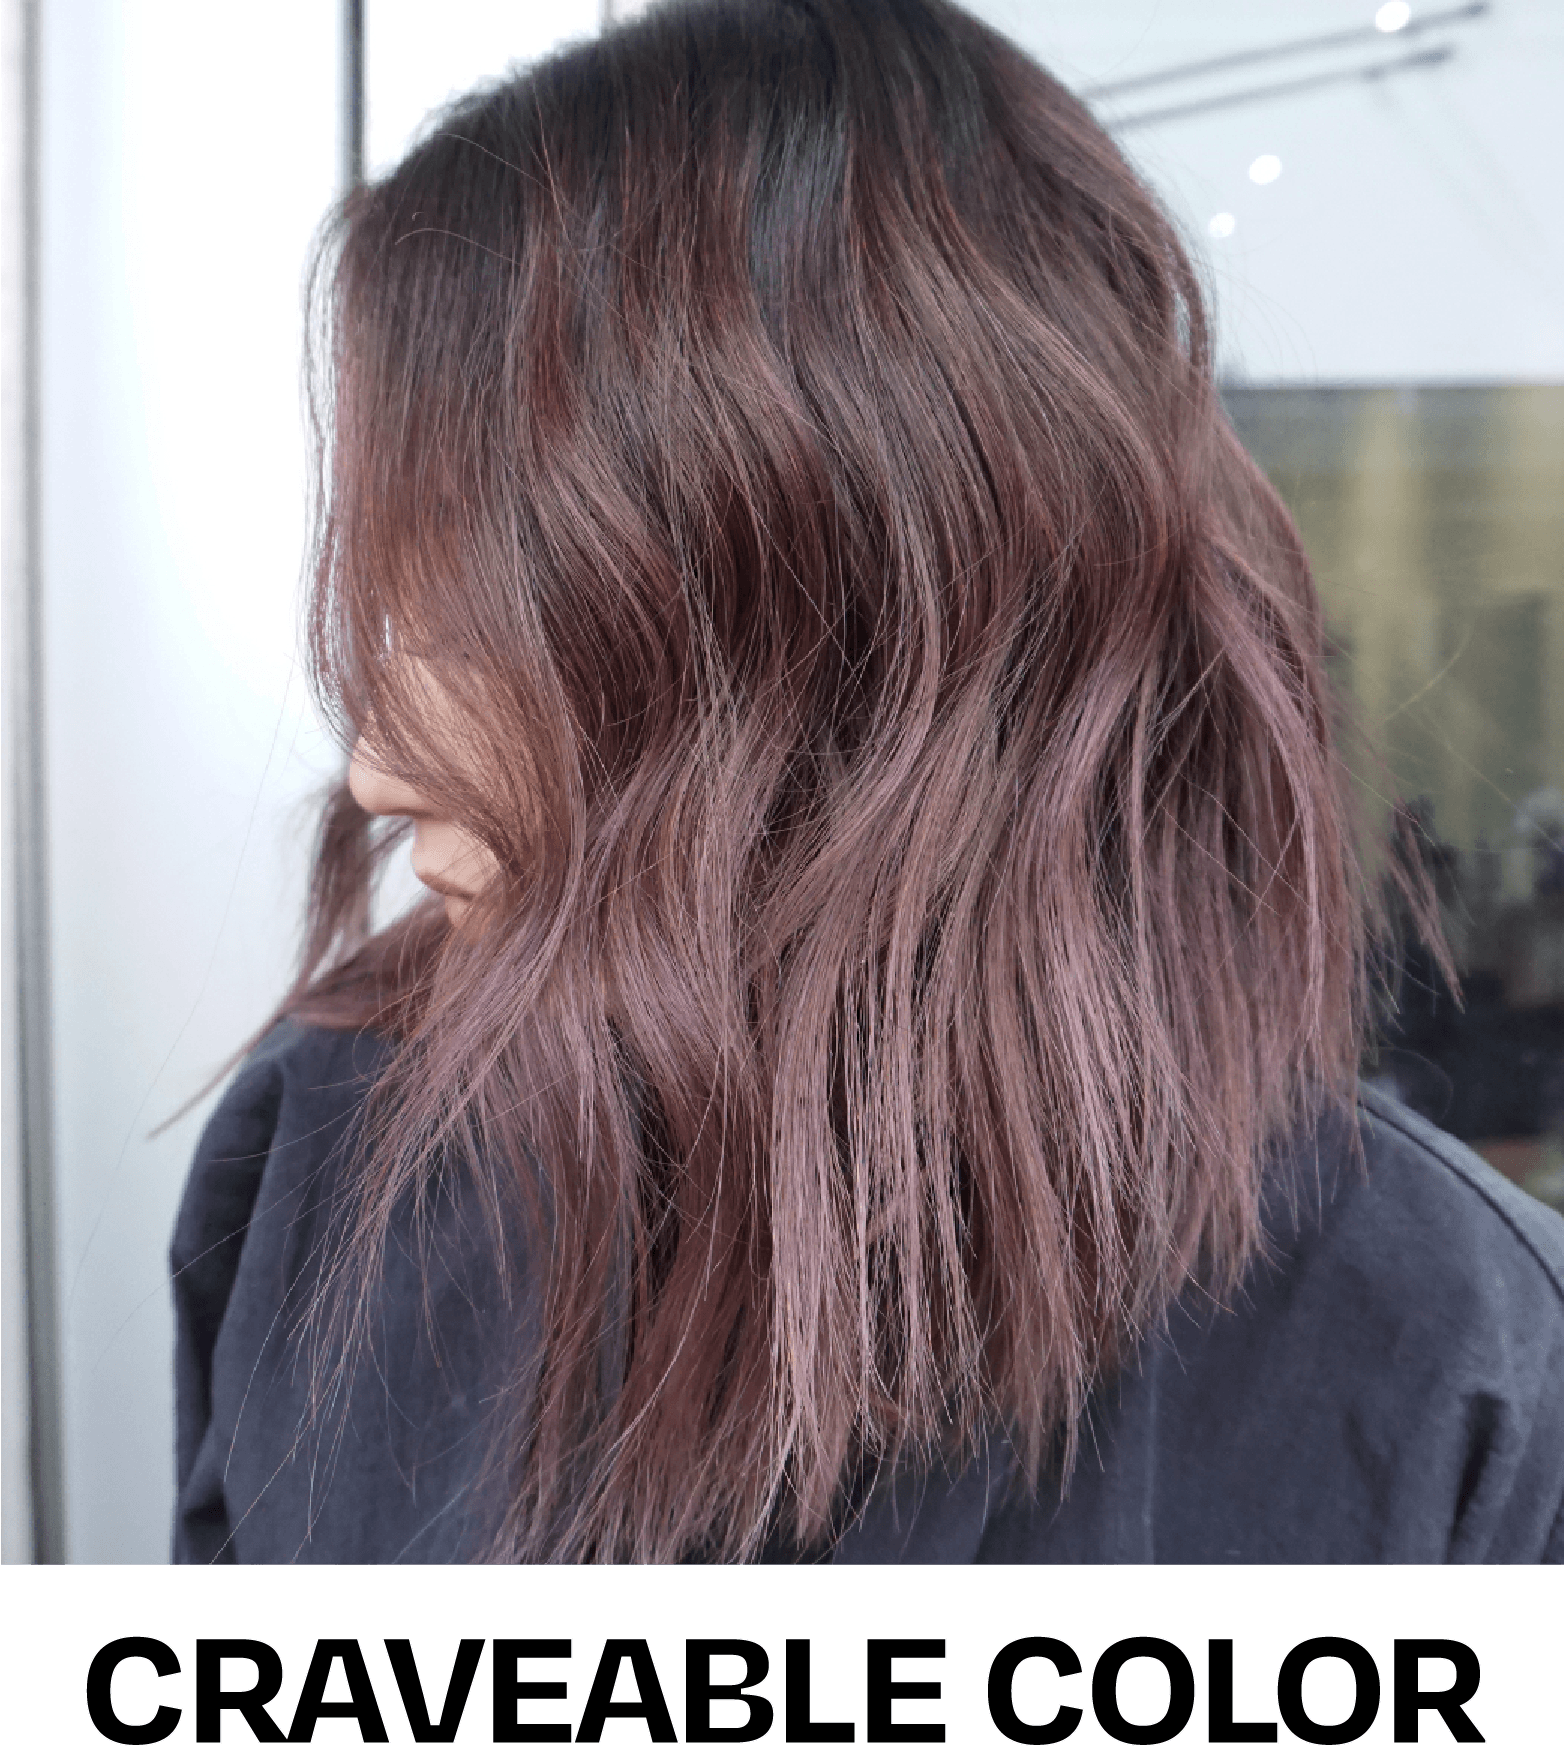 Overtone Haircare: Chocolate + lilac = A perfectly sweet color combo |  Milled